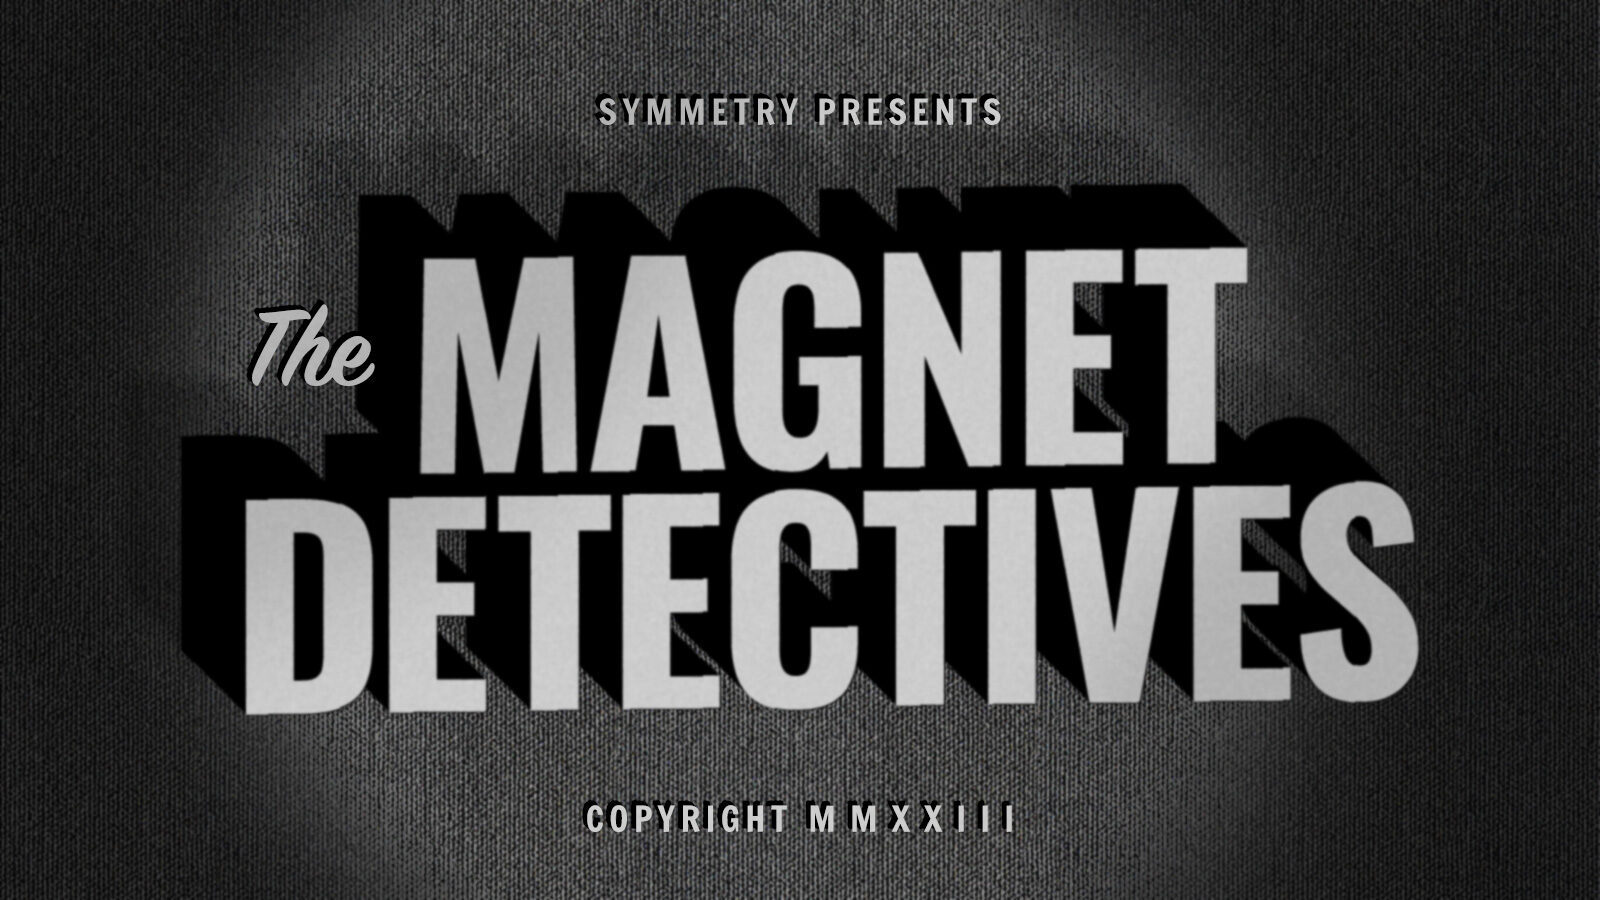 The Magnet Detectives